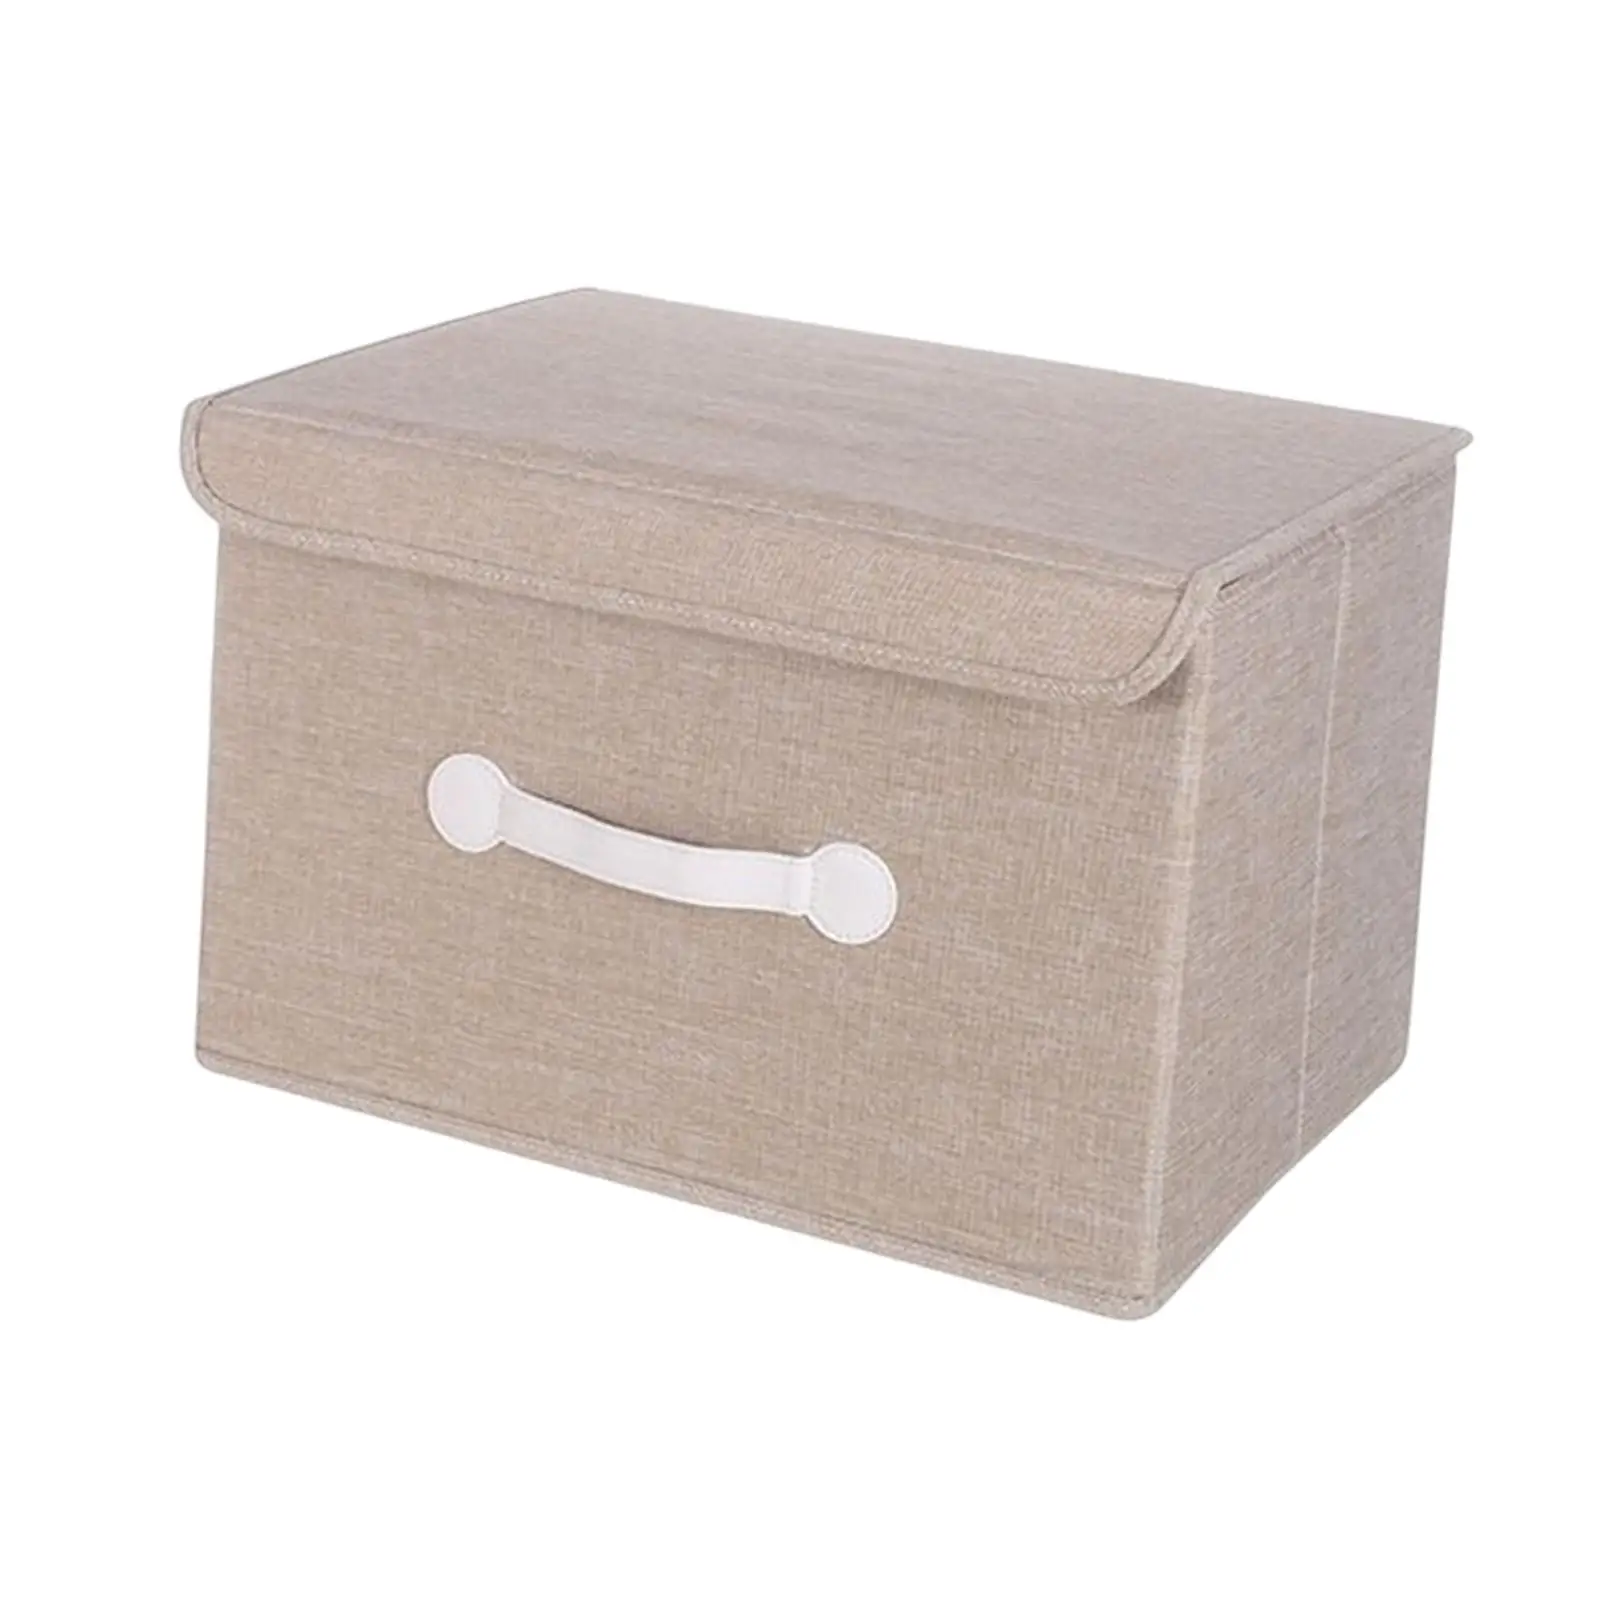 Foldable Storage Containers Basket Cube with Cover Storage Box Storage Bins for Shoes